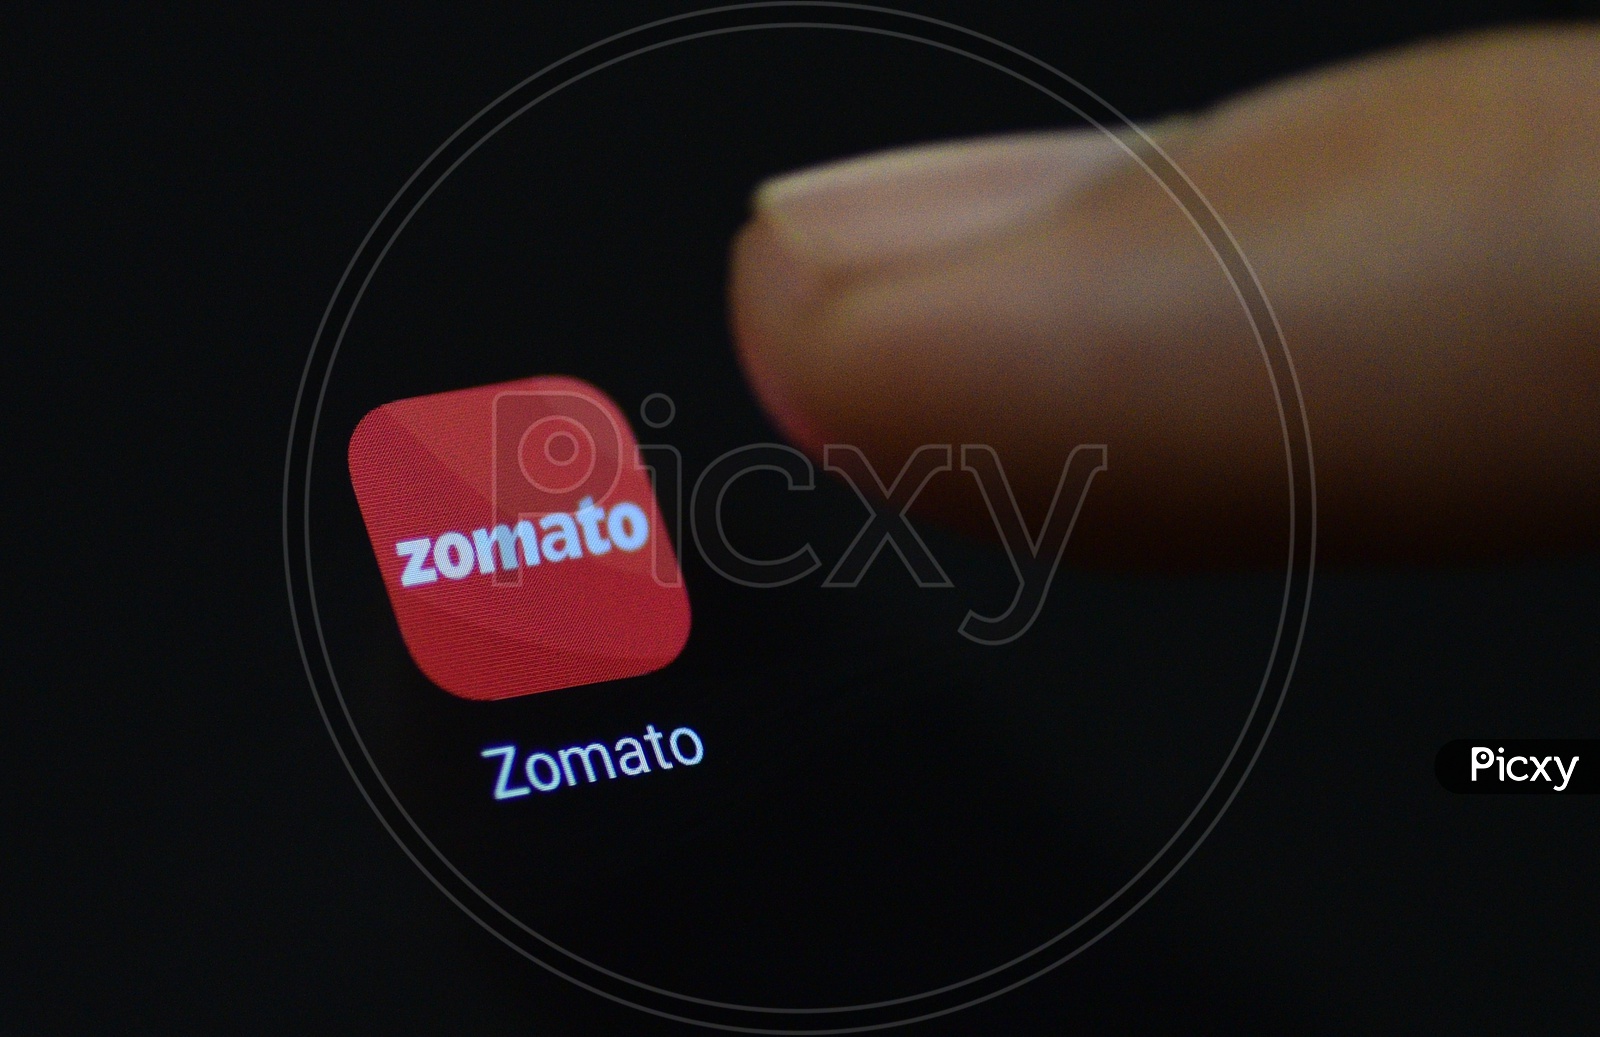 Zomato  Online Food Delivery  Mobile App Icon Opening on Smartphone Screen  Closeup With Finger